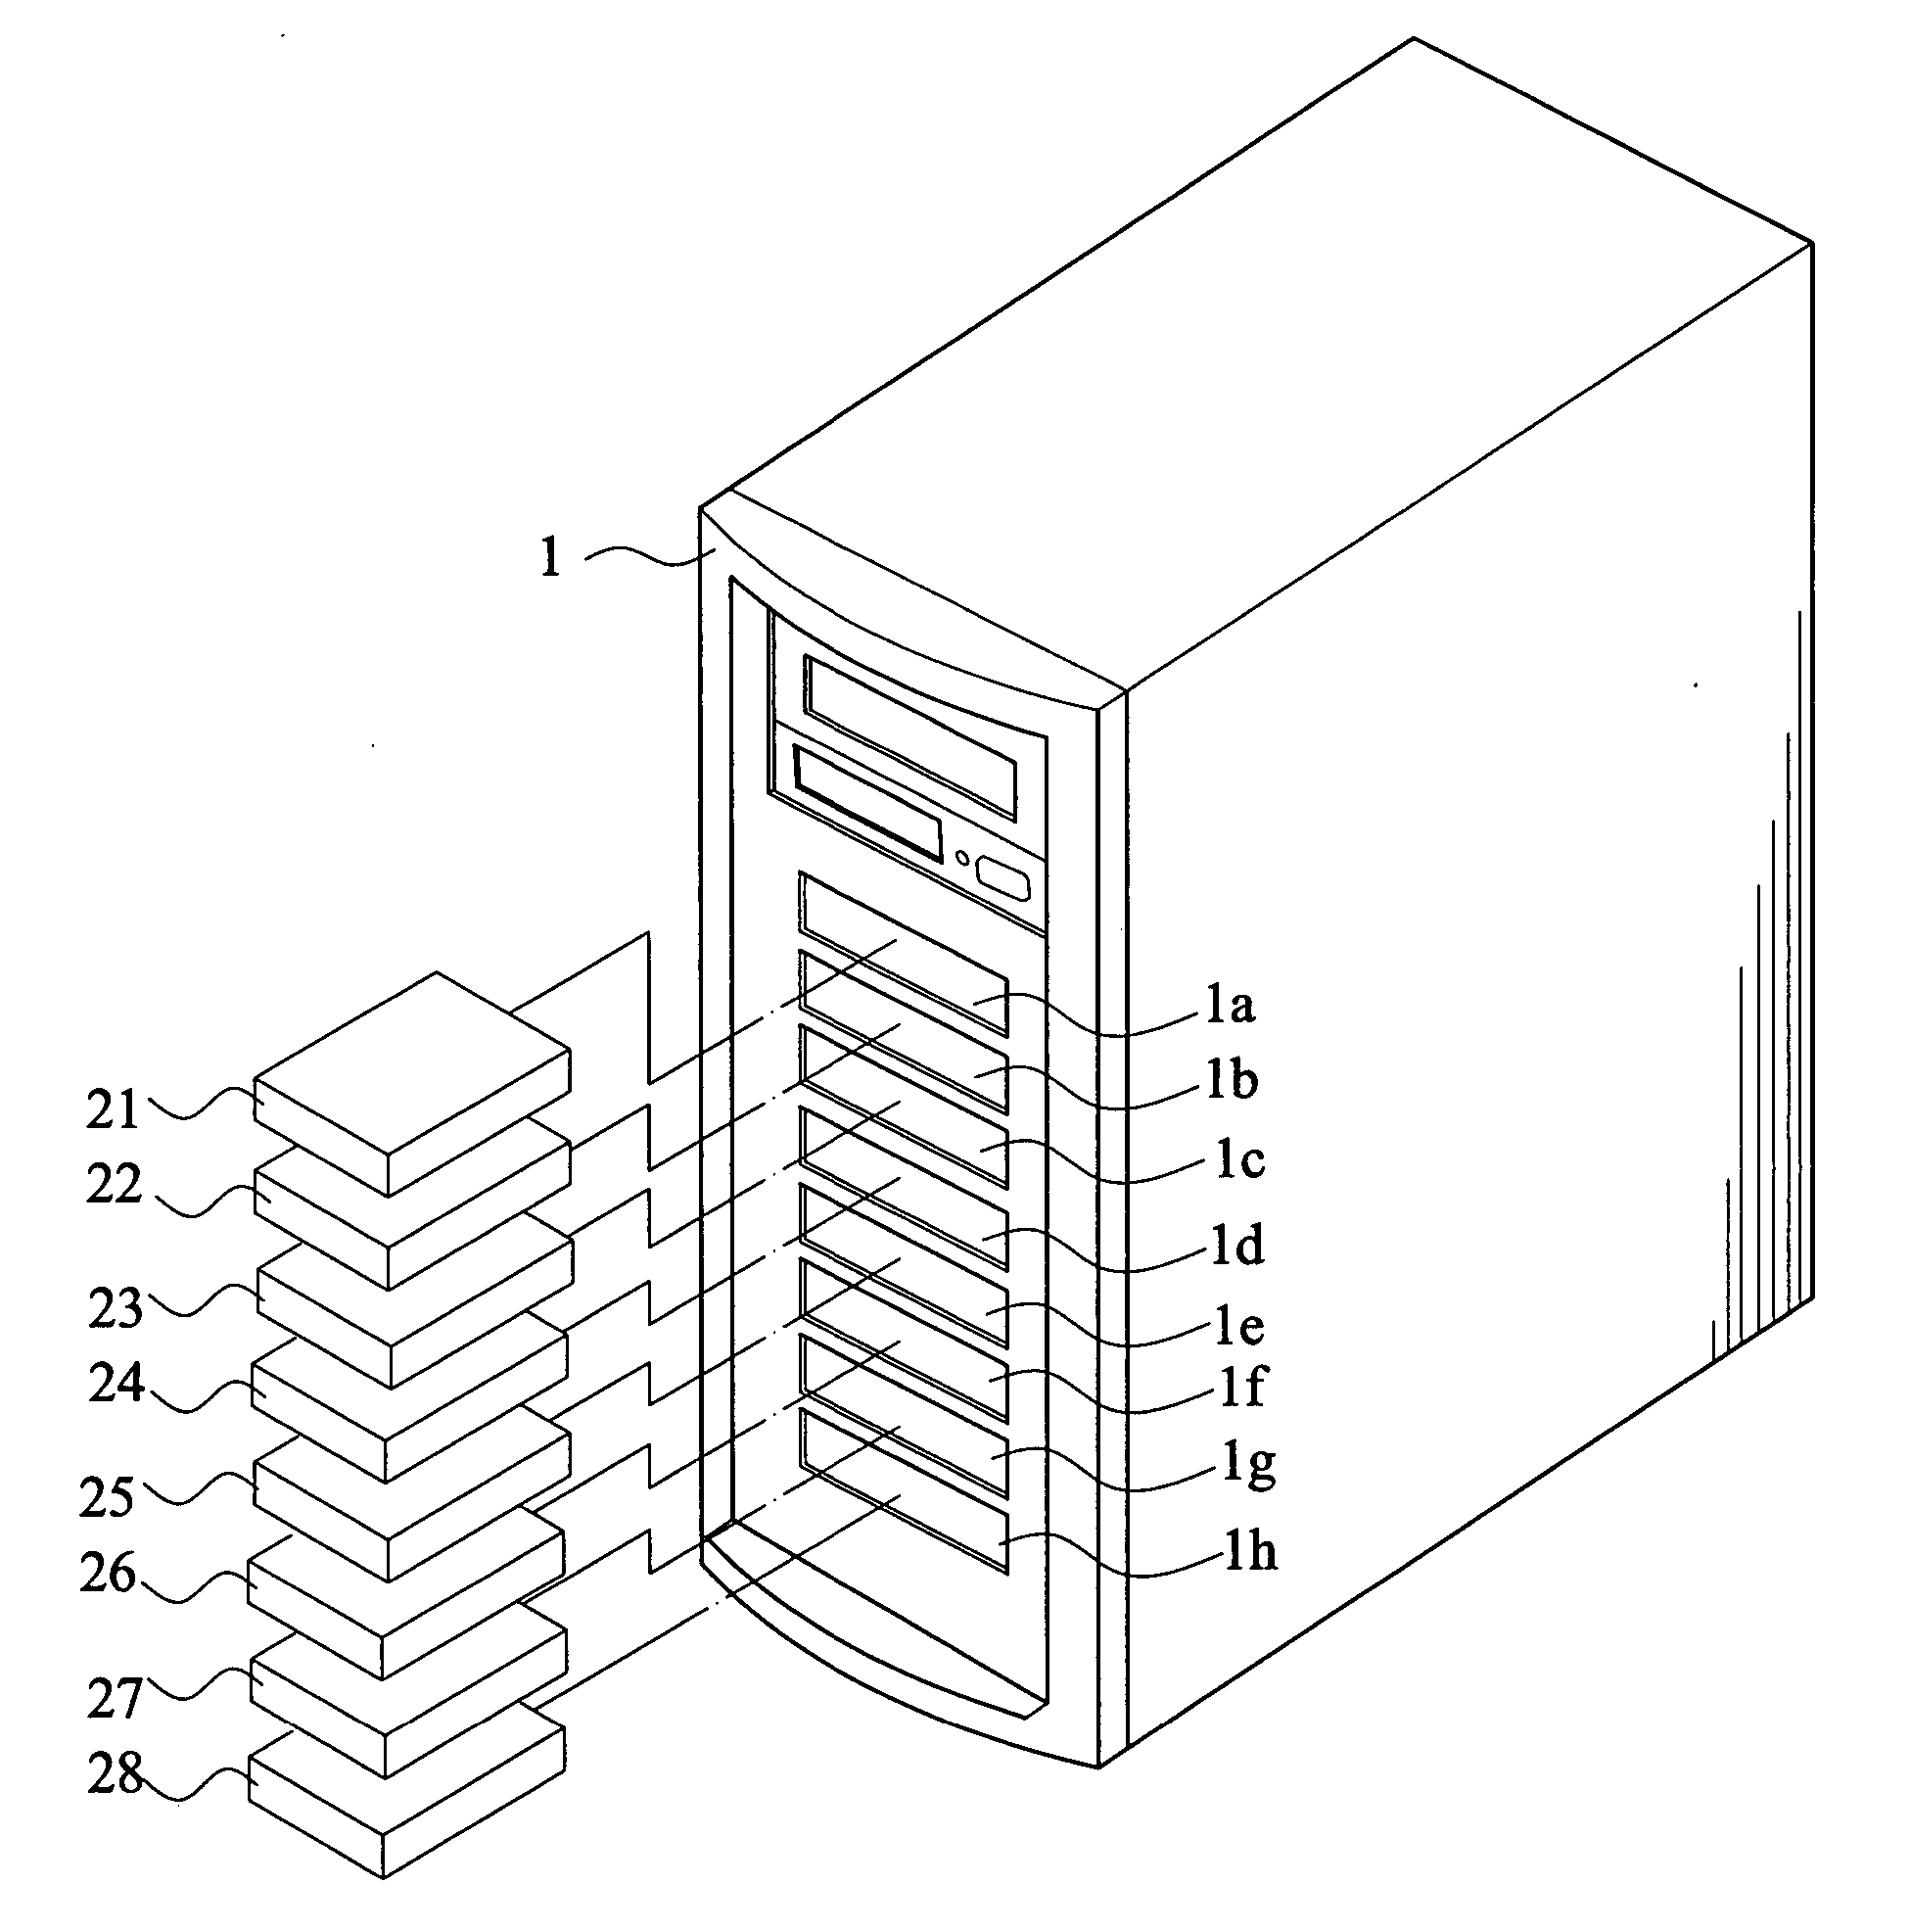 Method for copying source data from a source hard disk to multiple target hard disks